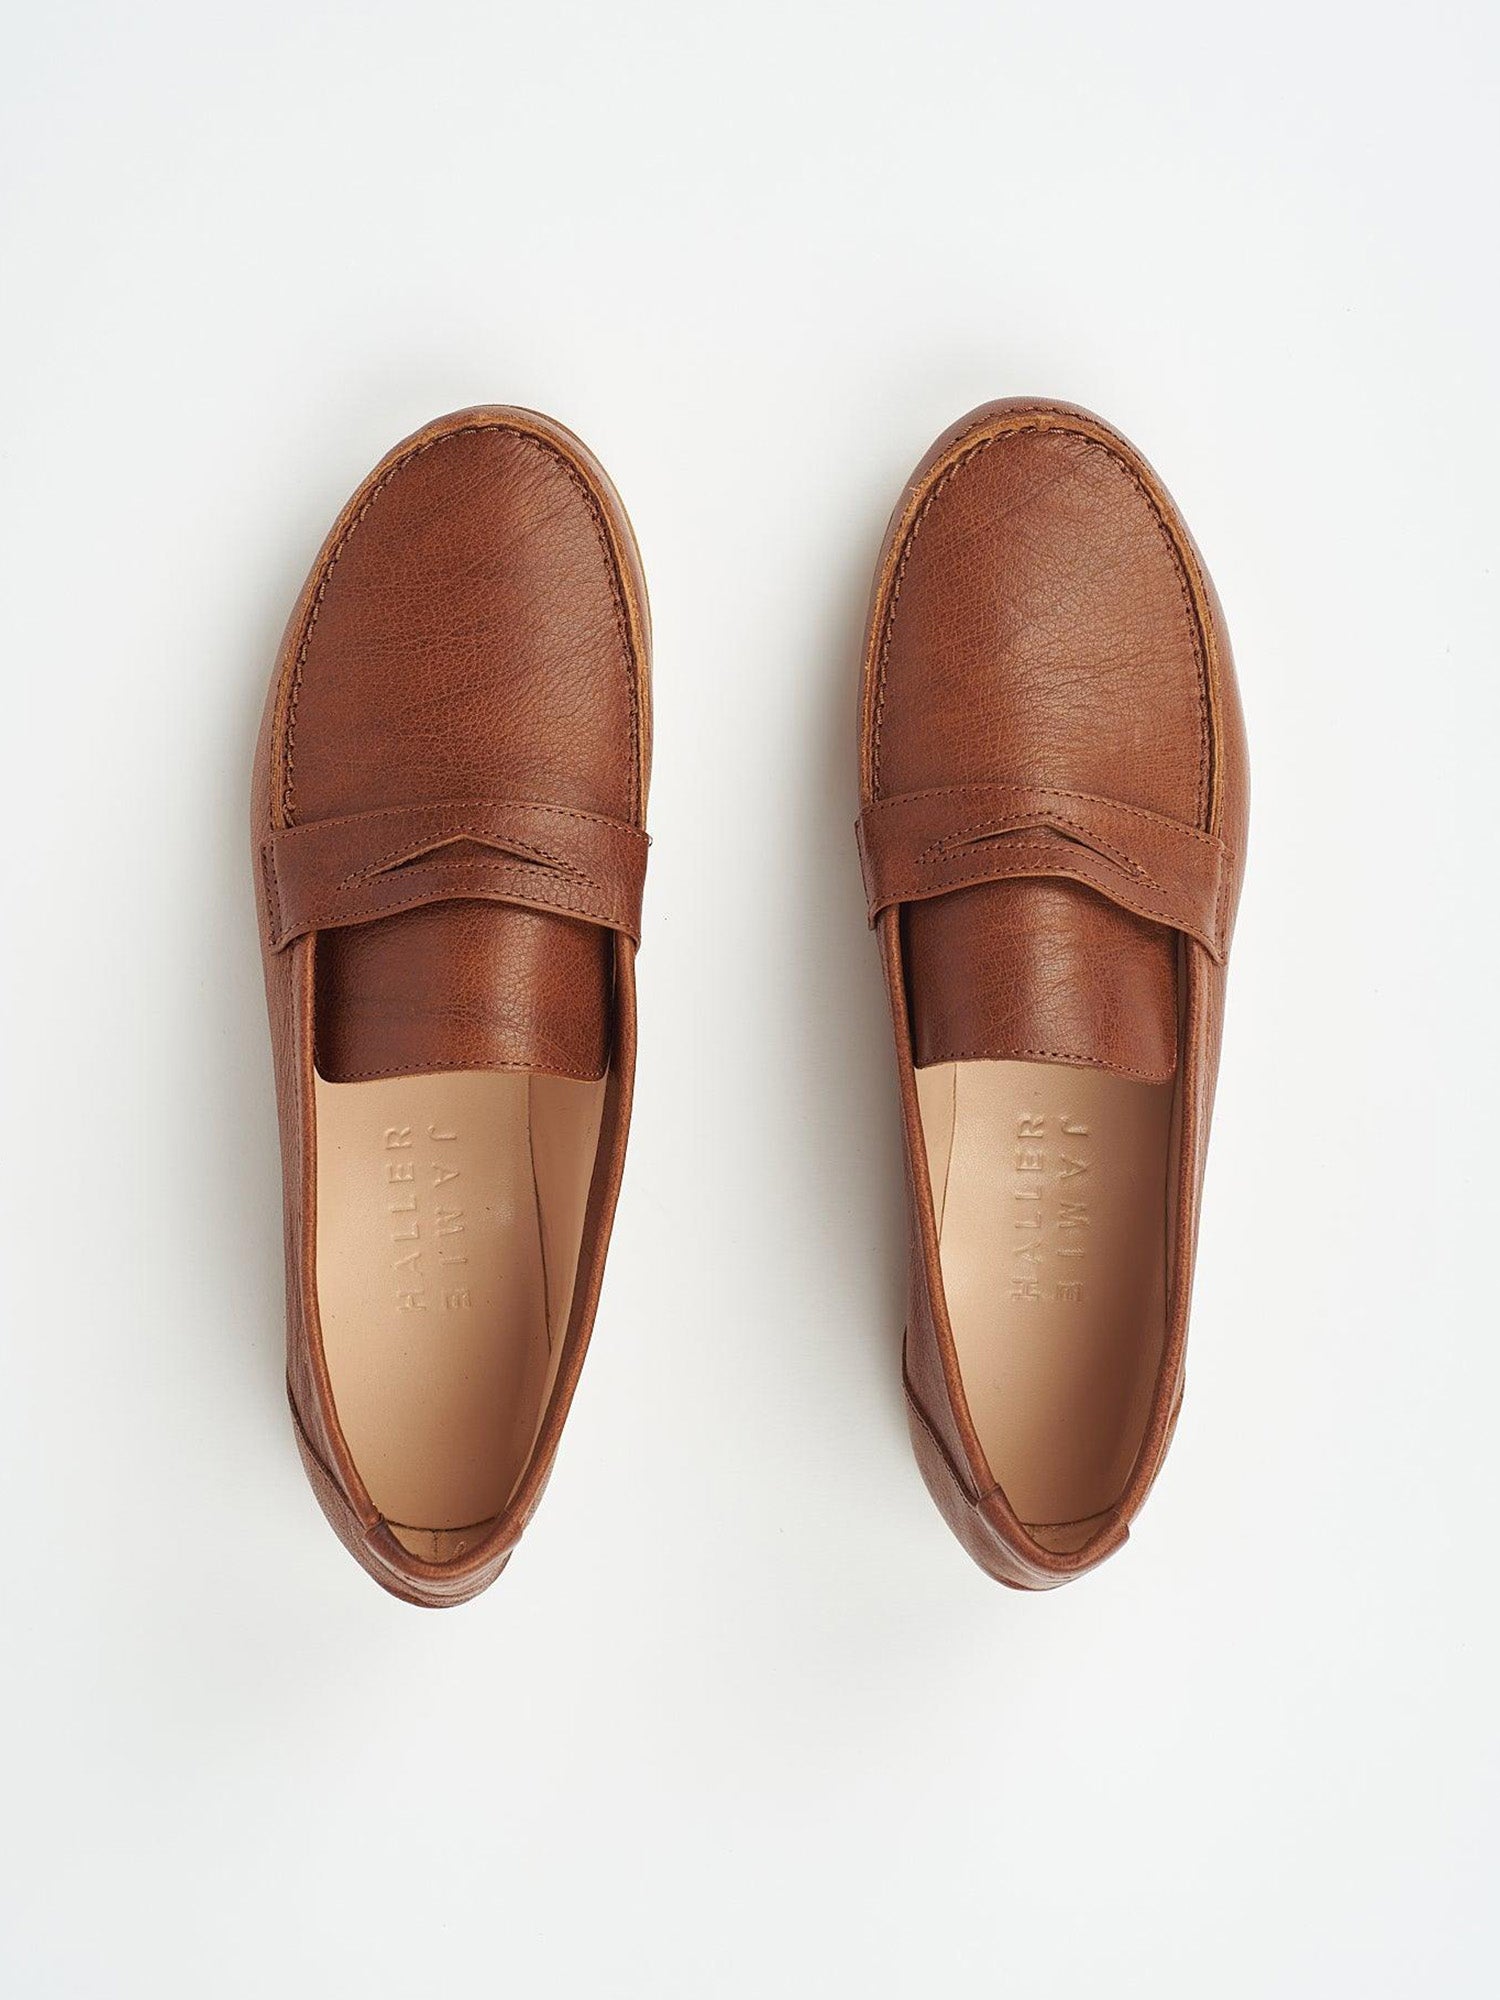 The Penny Loafer in Brown Flat View